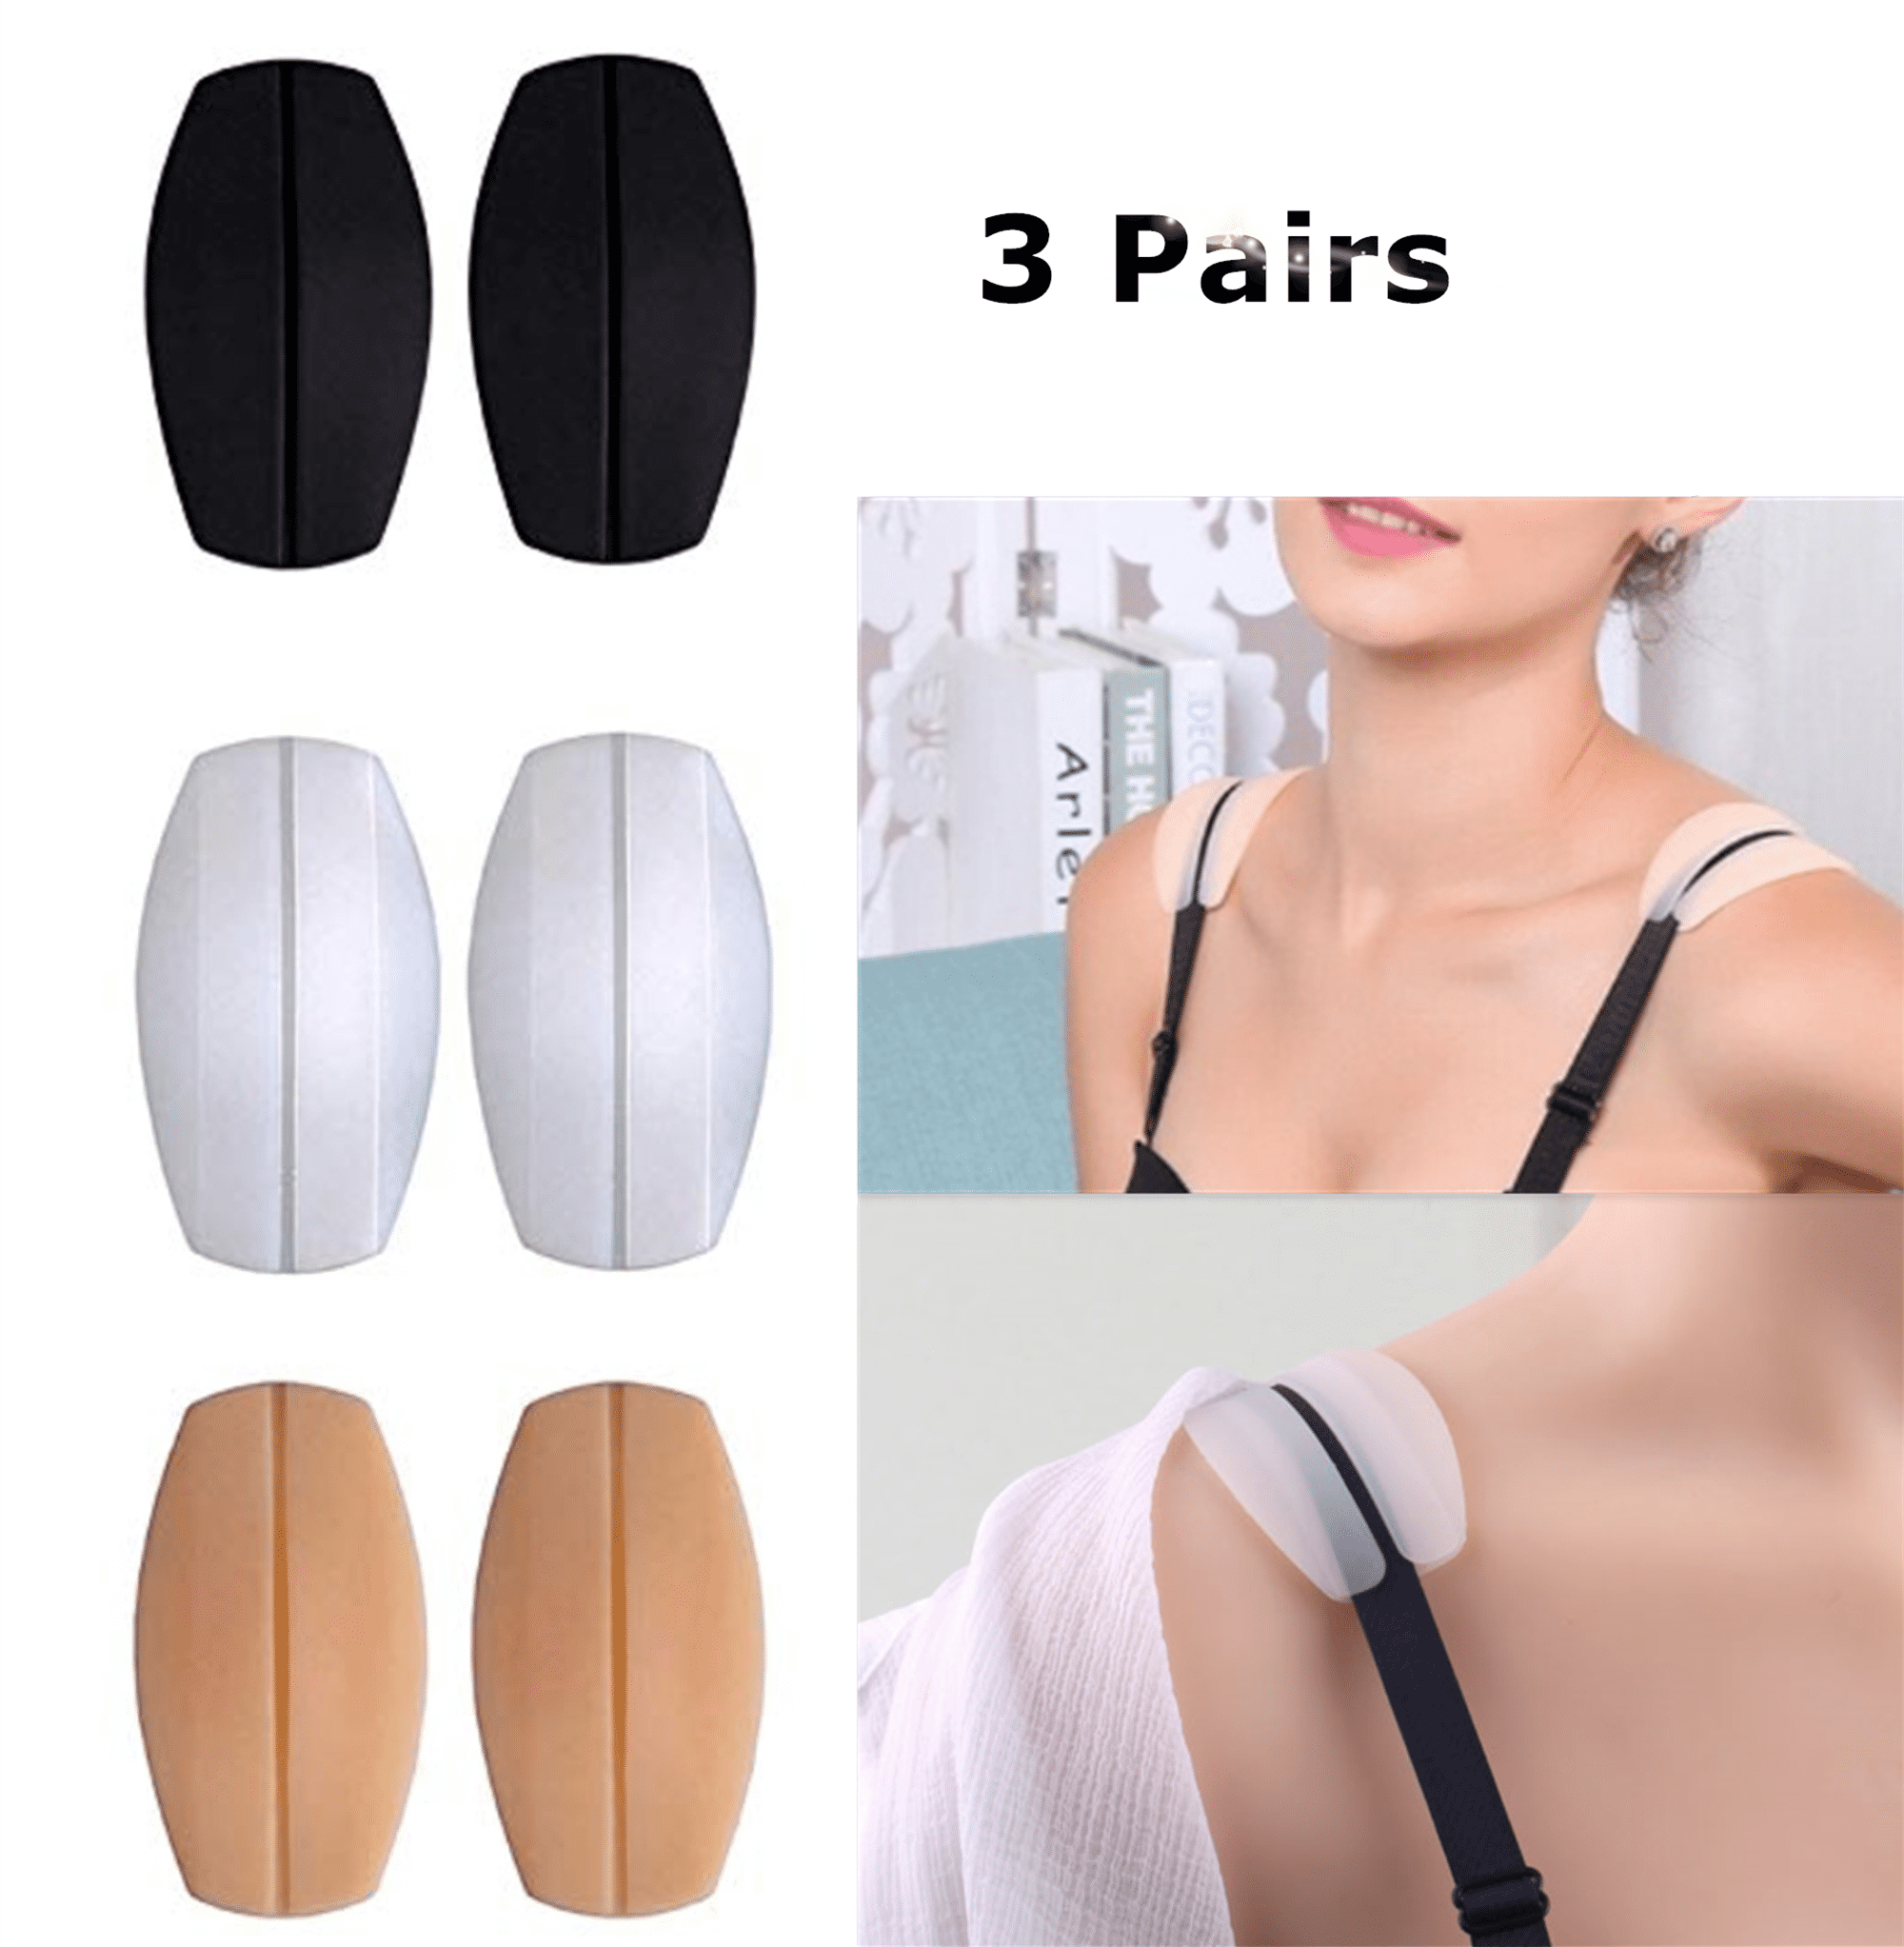 Bra Strap Cushions Holder,Sermicle Silicone Non-Slip Pliable Shoulder Protectors Pads Bra Cushions Pads 4 Pairs